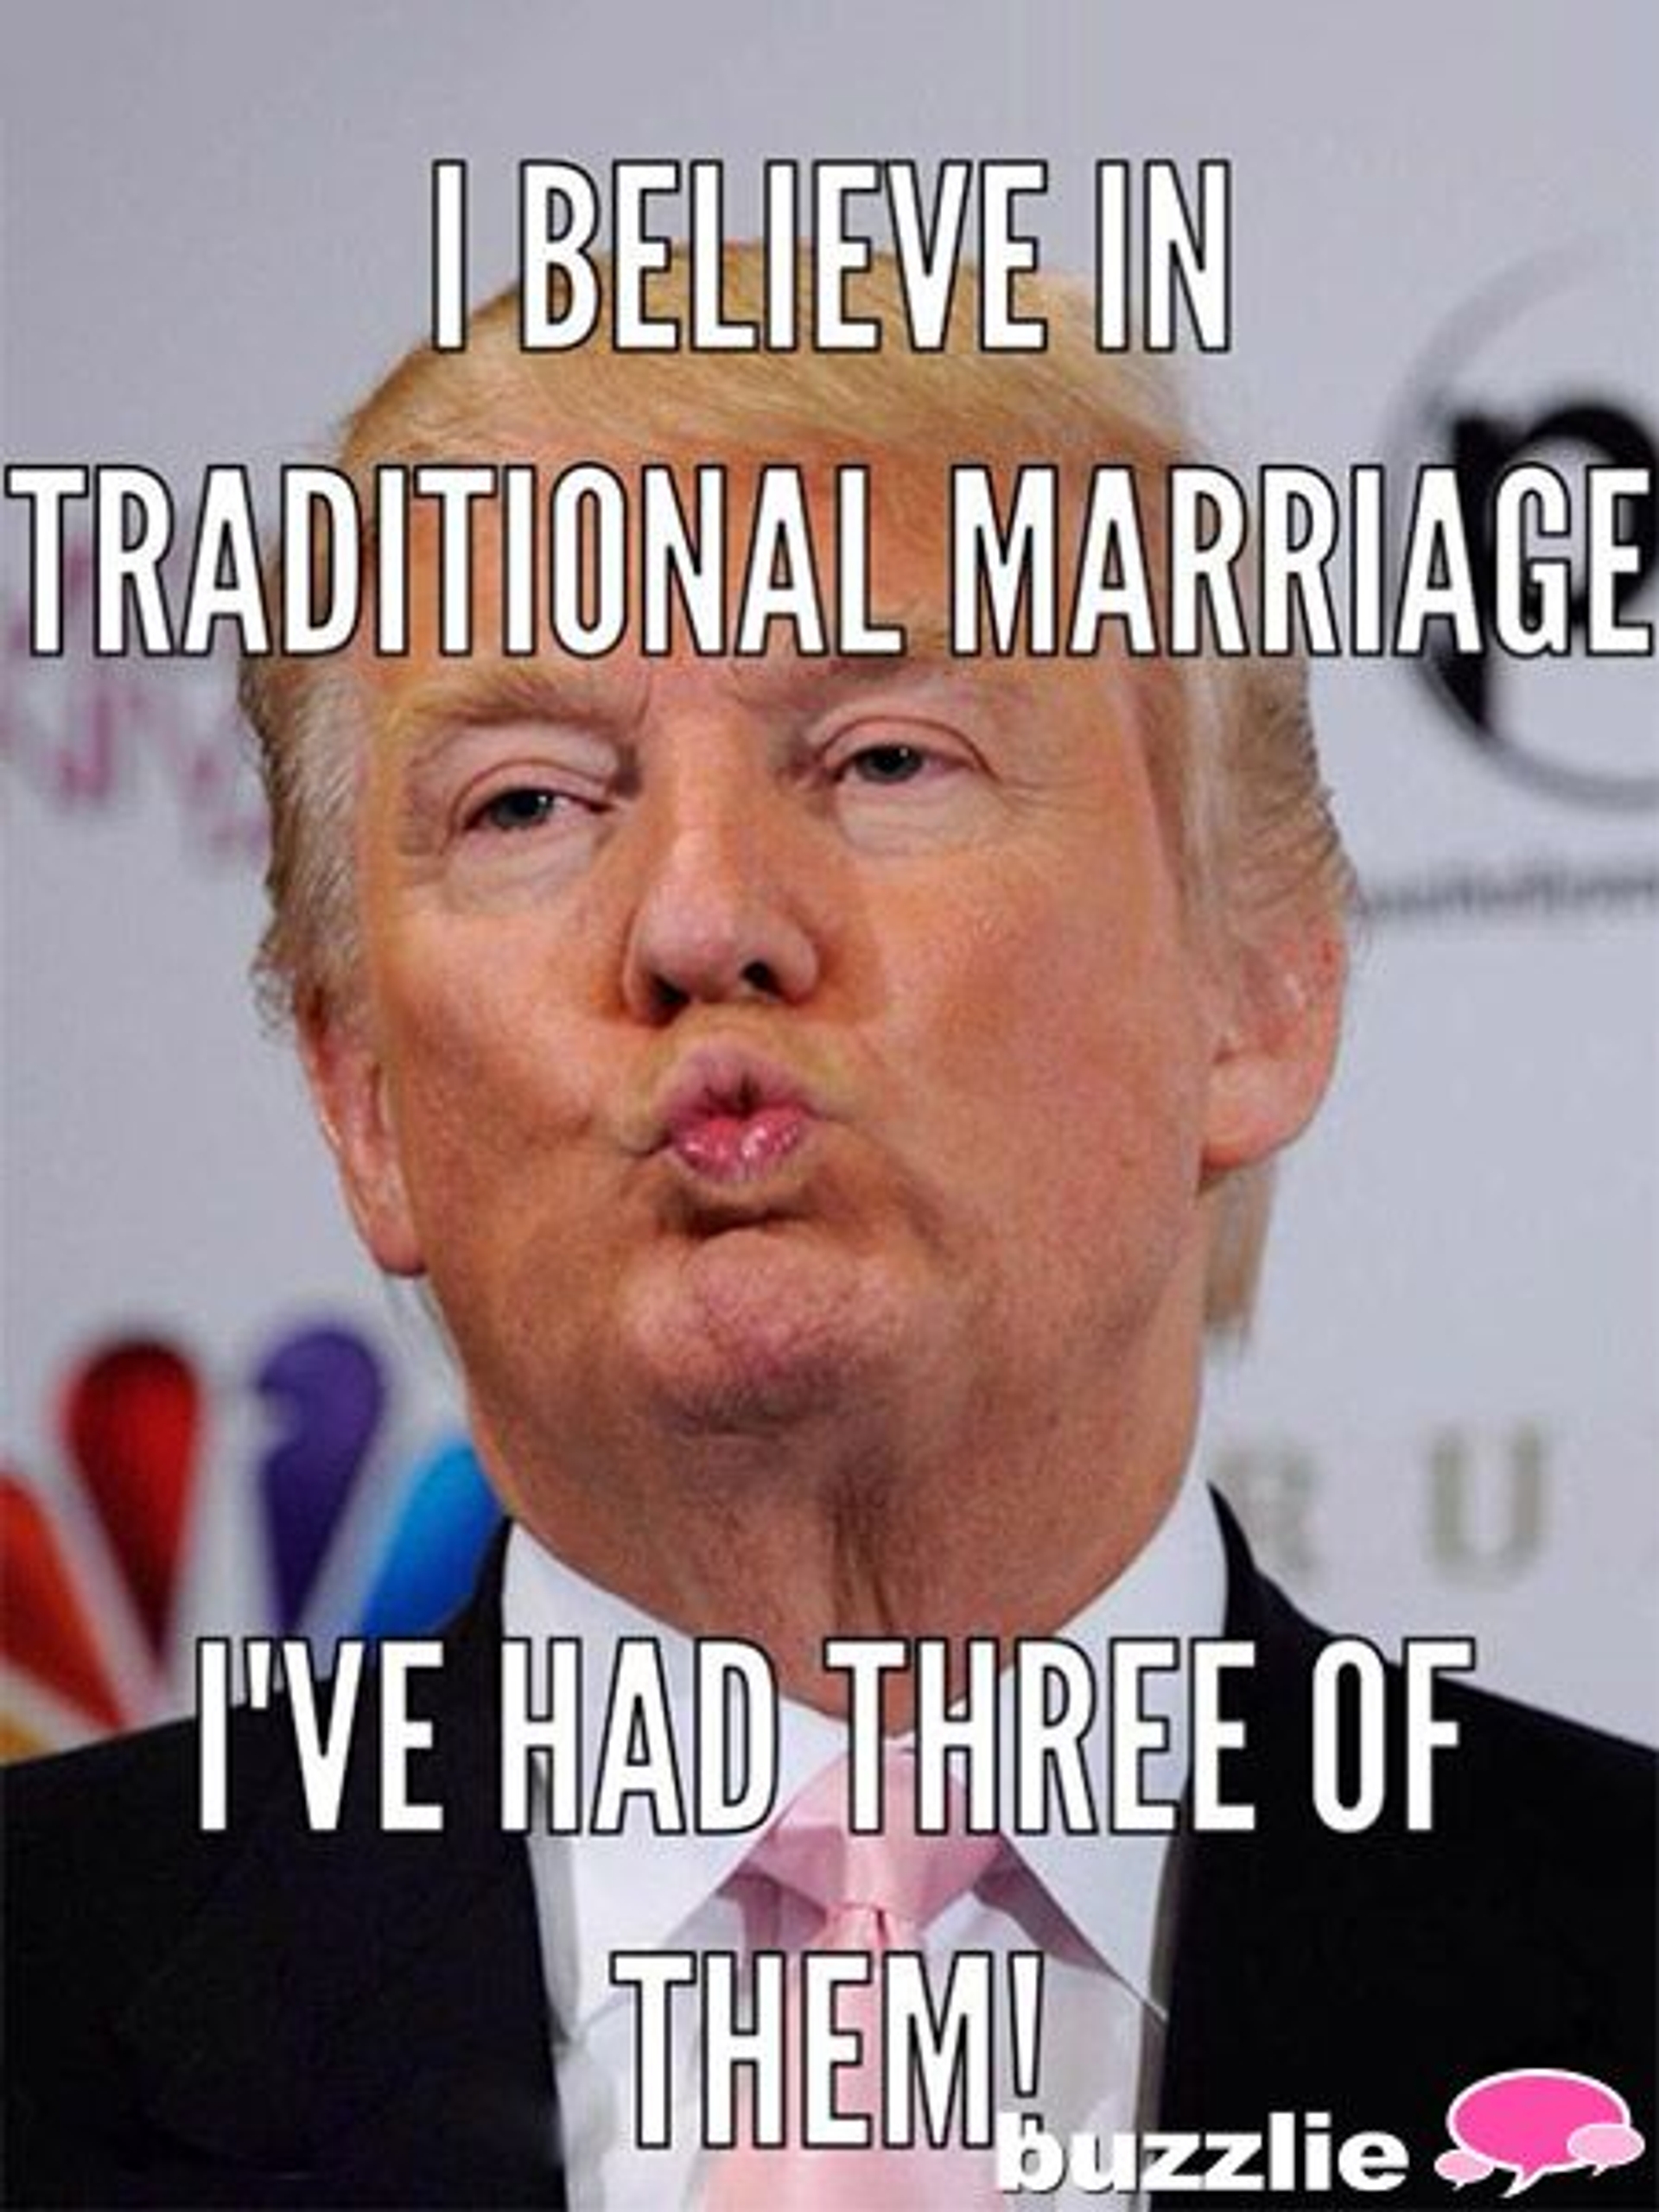 Traditional marriage